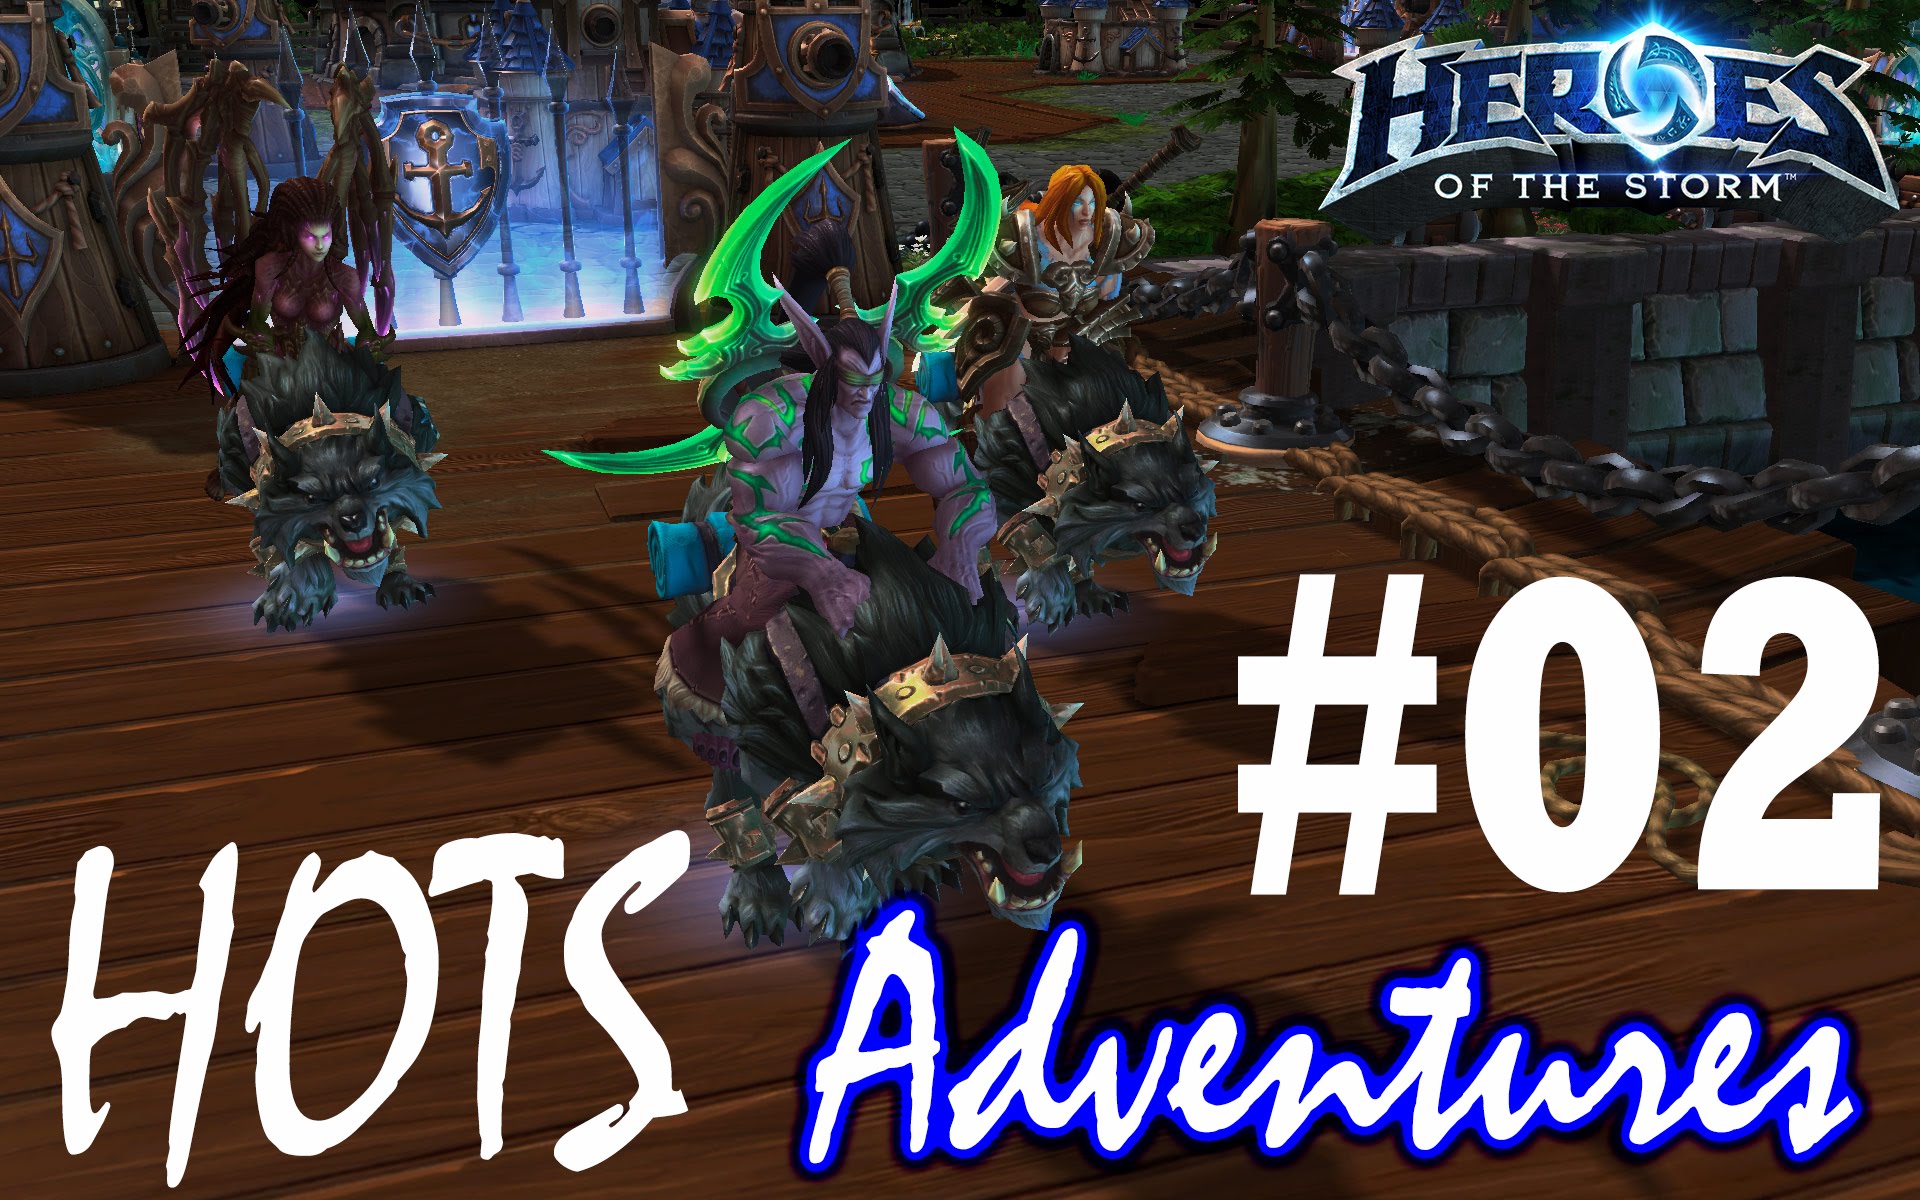 STREAM Heroes of the Storm #2 | HOTS Adventures | Bayesta & Friends de Shendeluth Play